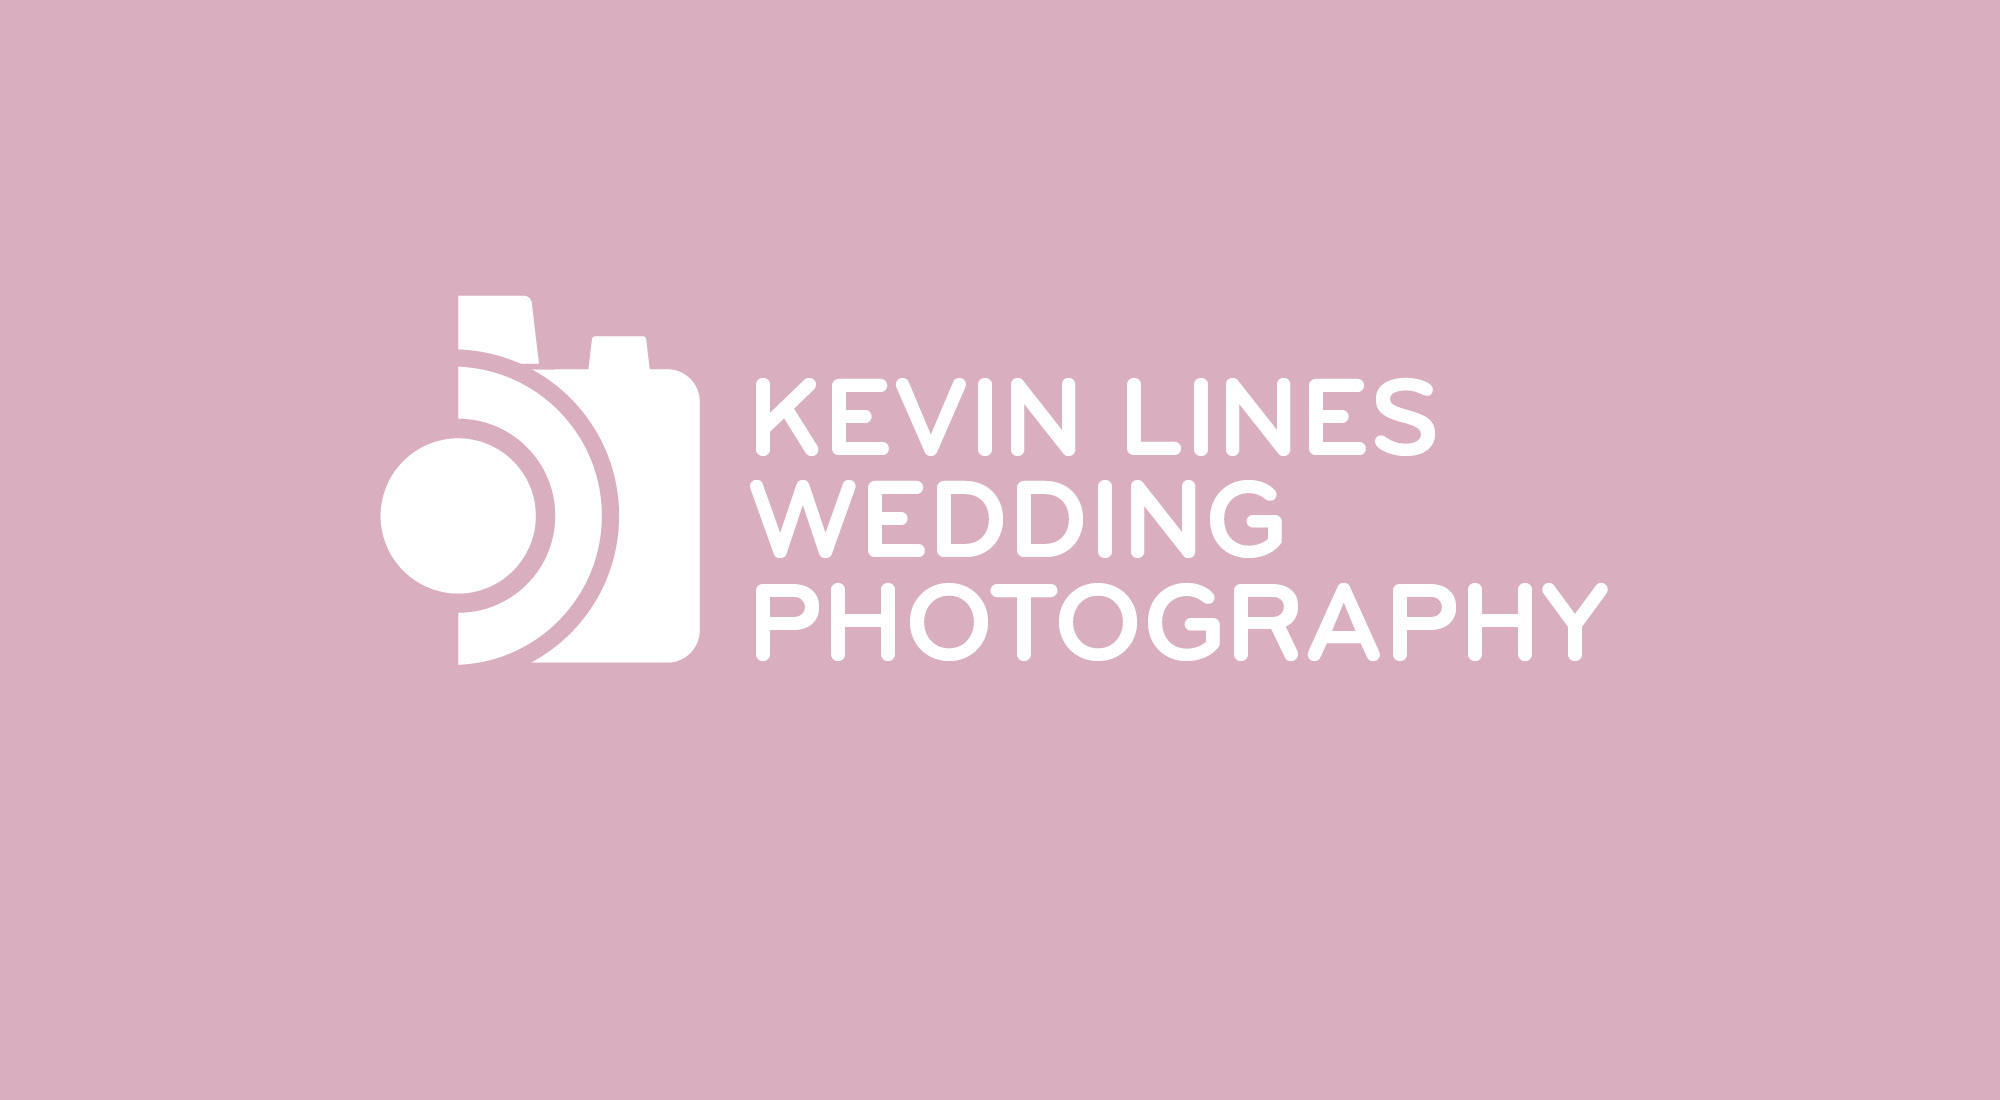 Kevin Lines Wedding and Events Photography Welwyn Garden City Hertfordshire